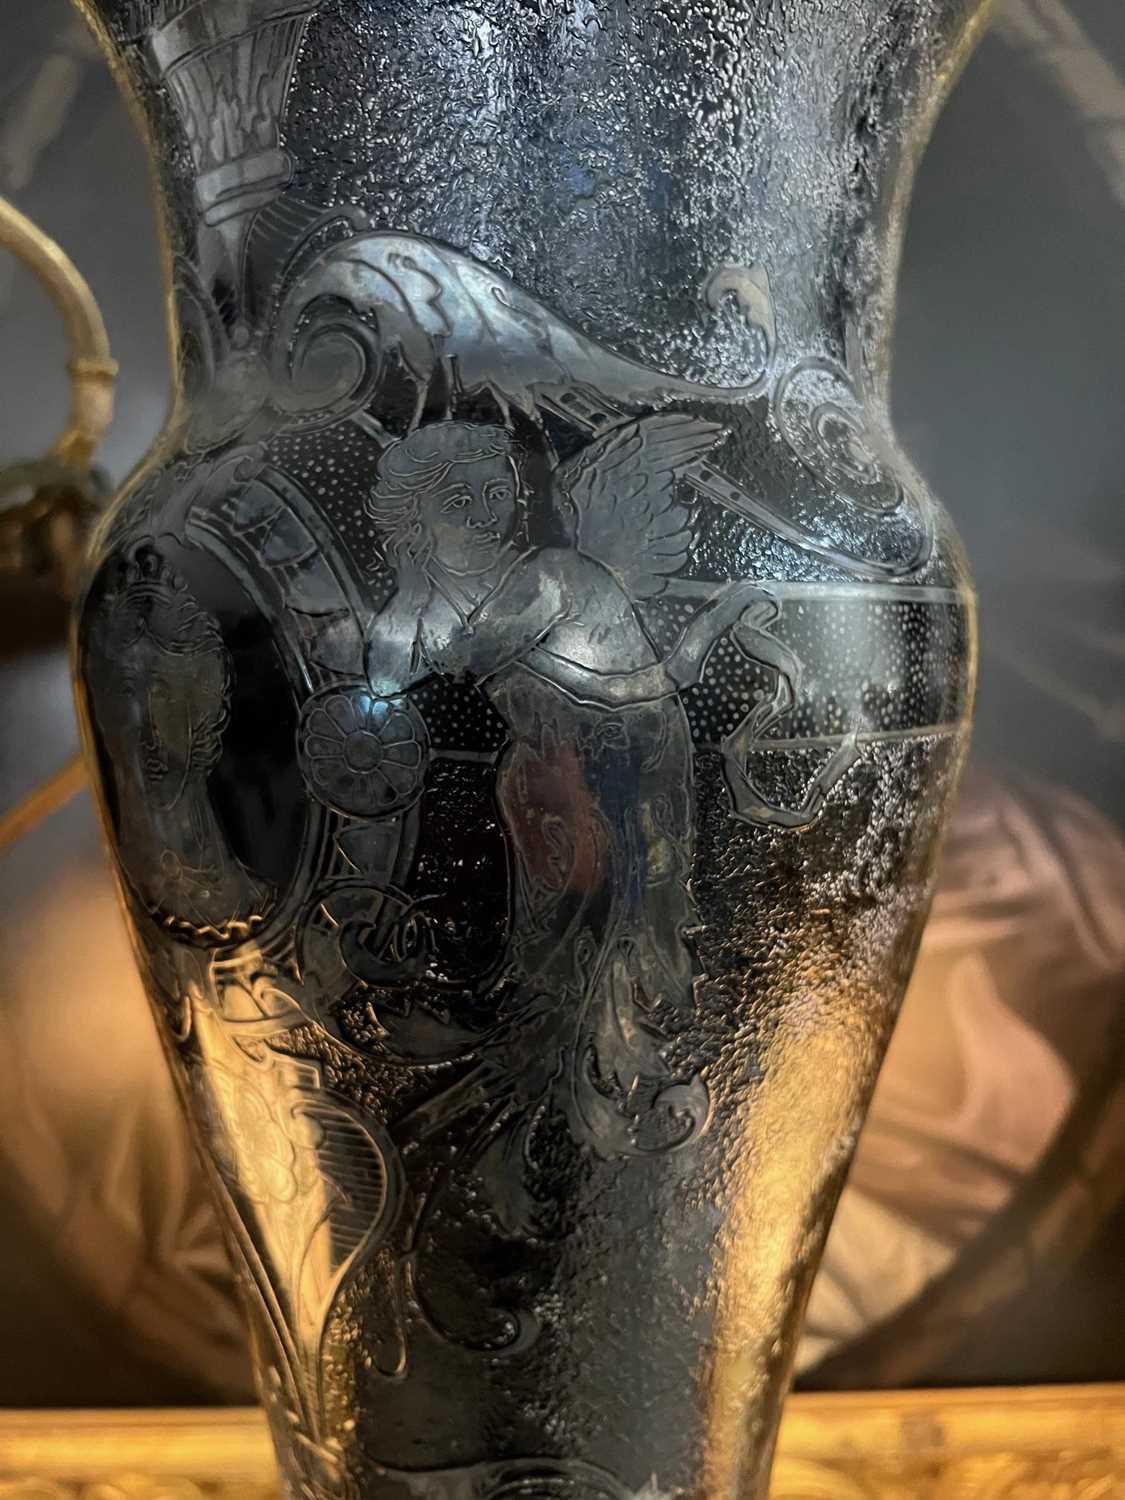 A MASSIVE 19TH CENTURY BOHEMIAN OVERLAY AND ENGRAVED GLASS VASE - Image 7 of 10